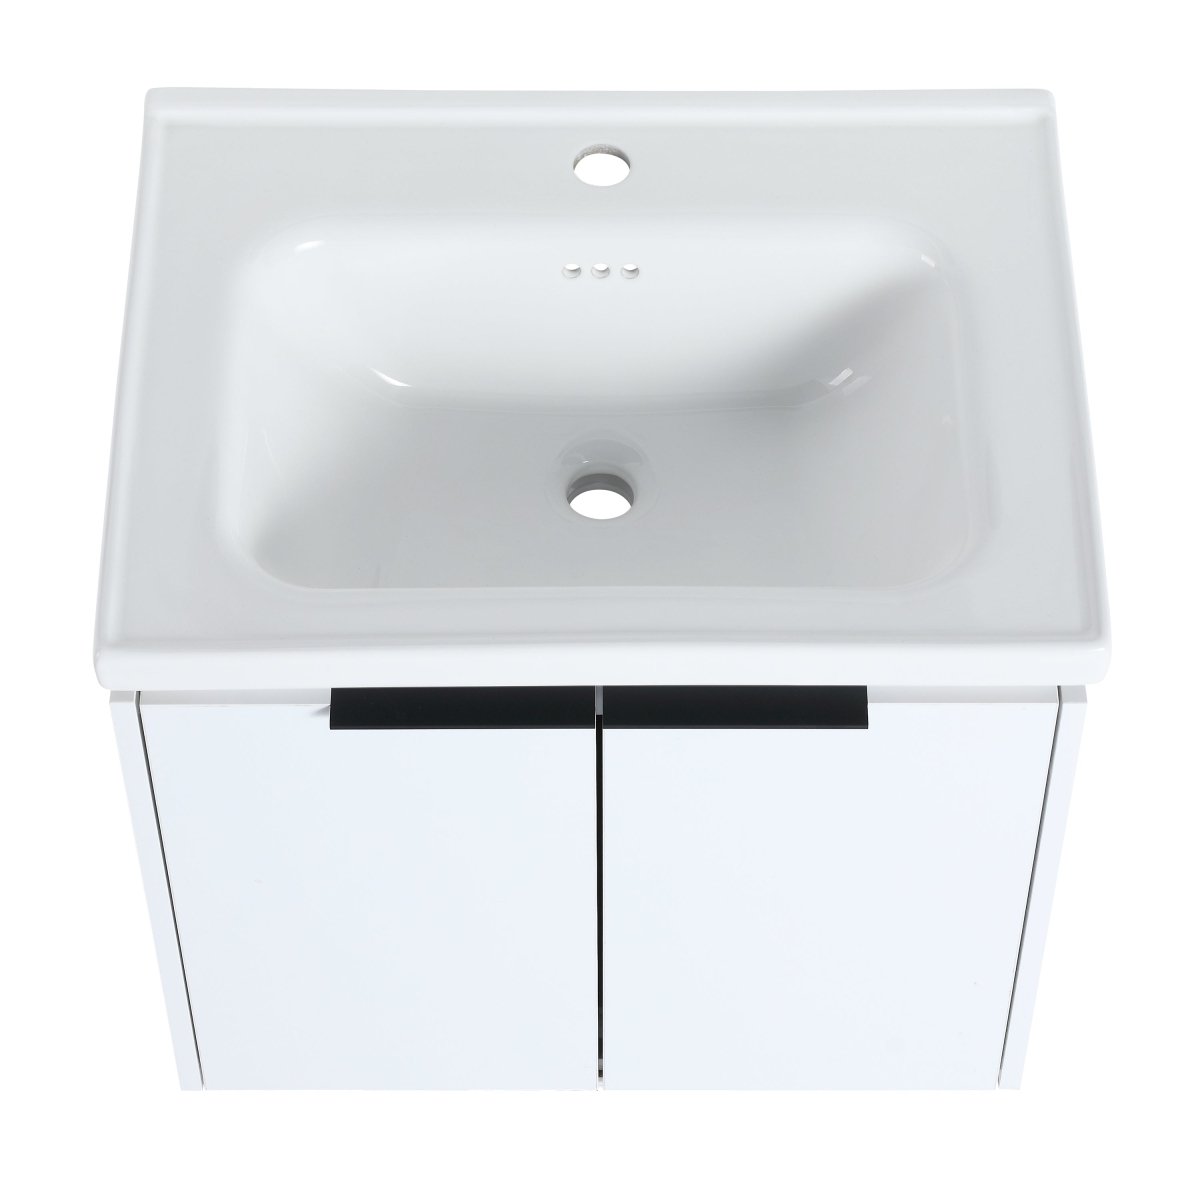 Exbrite 60 Inch Soft Close Doors Bathroom Vanity With Sink, and A Small Storage Shelves